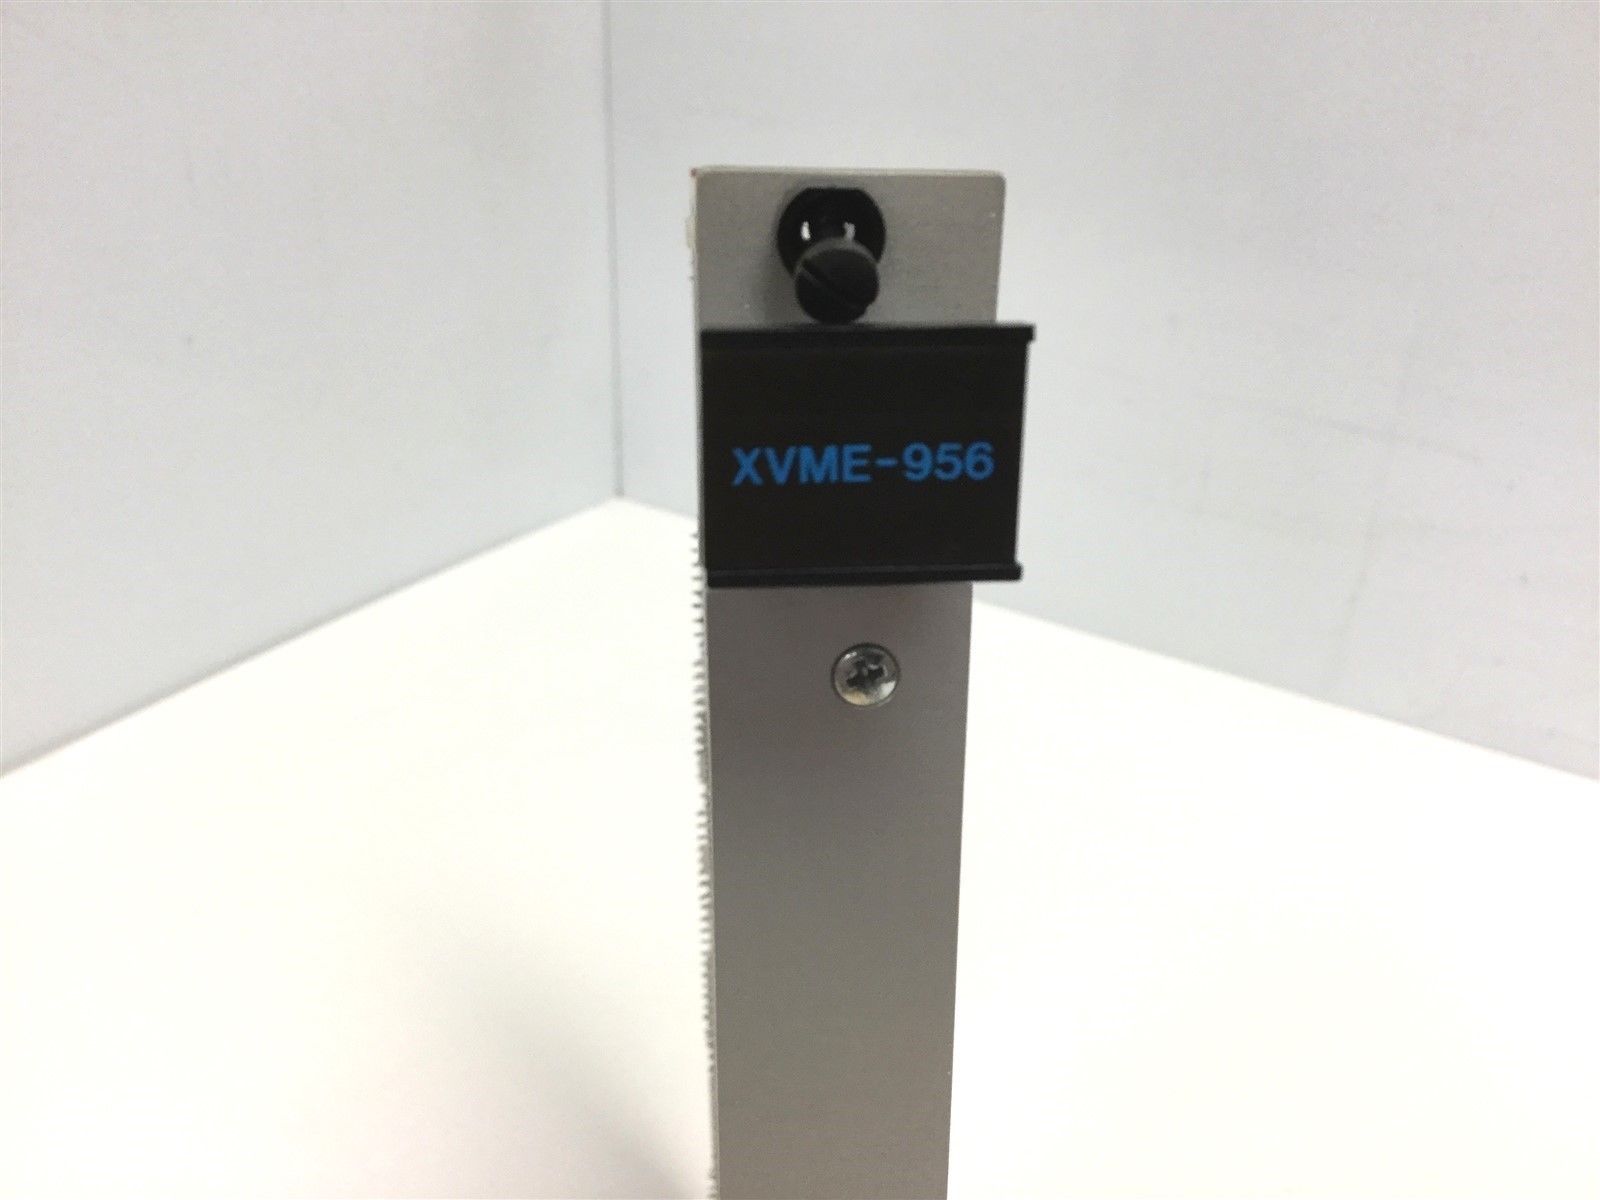 XYCOM XVME-956 Expansion Carrier, Space for 2 PC/104 Open Ar XVME-956,XYCOM,PLC